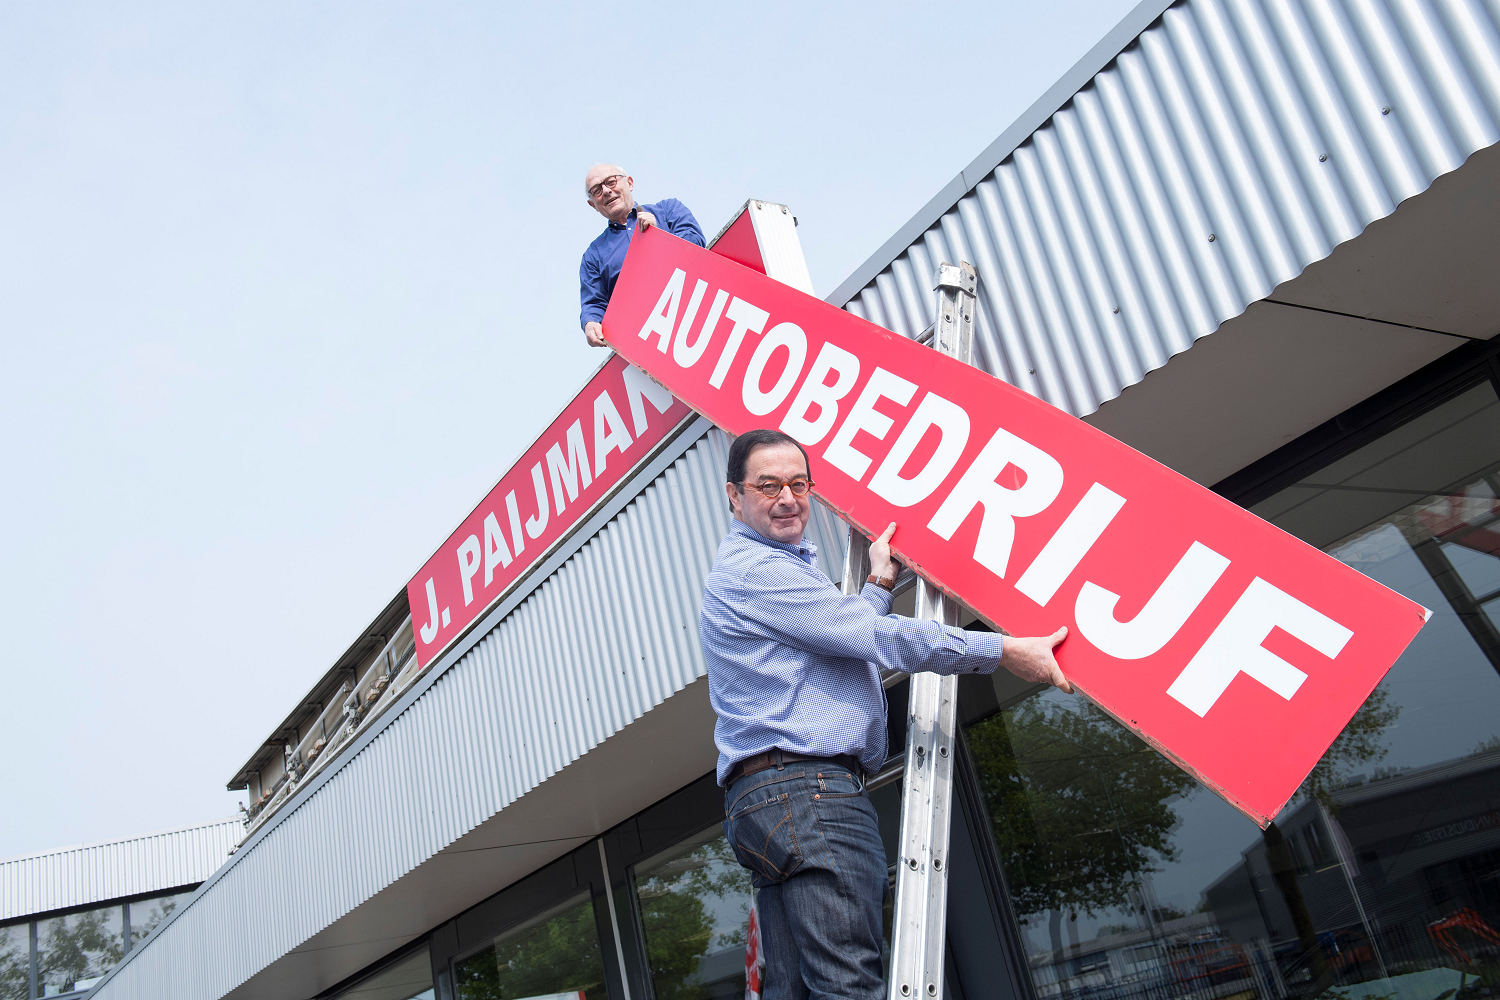 Peter and Wout (on the roof) Paijmans have closed their company Autobedrijf J. Paijmans after 56 years. (photograph: Frans Lahaye)